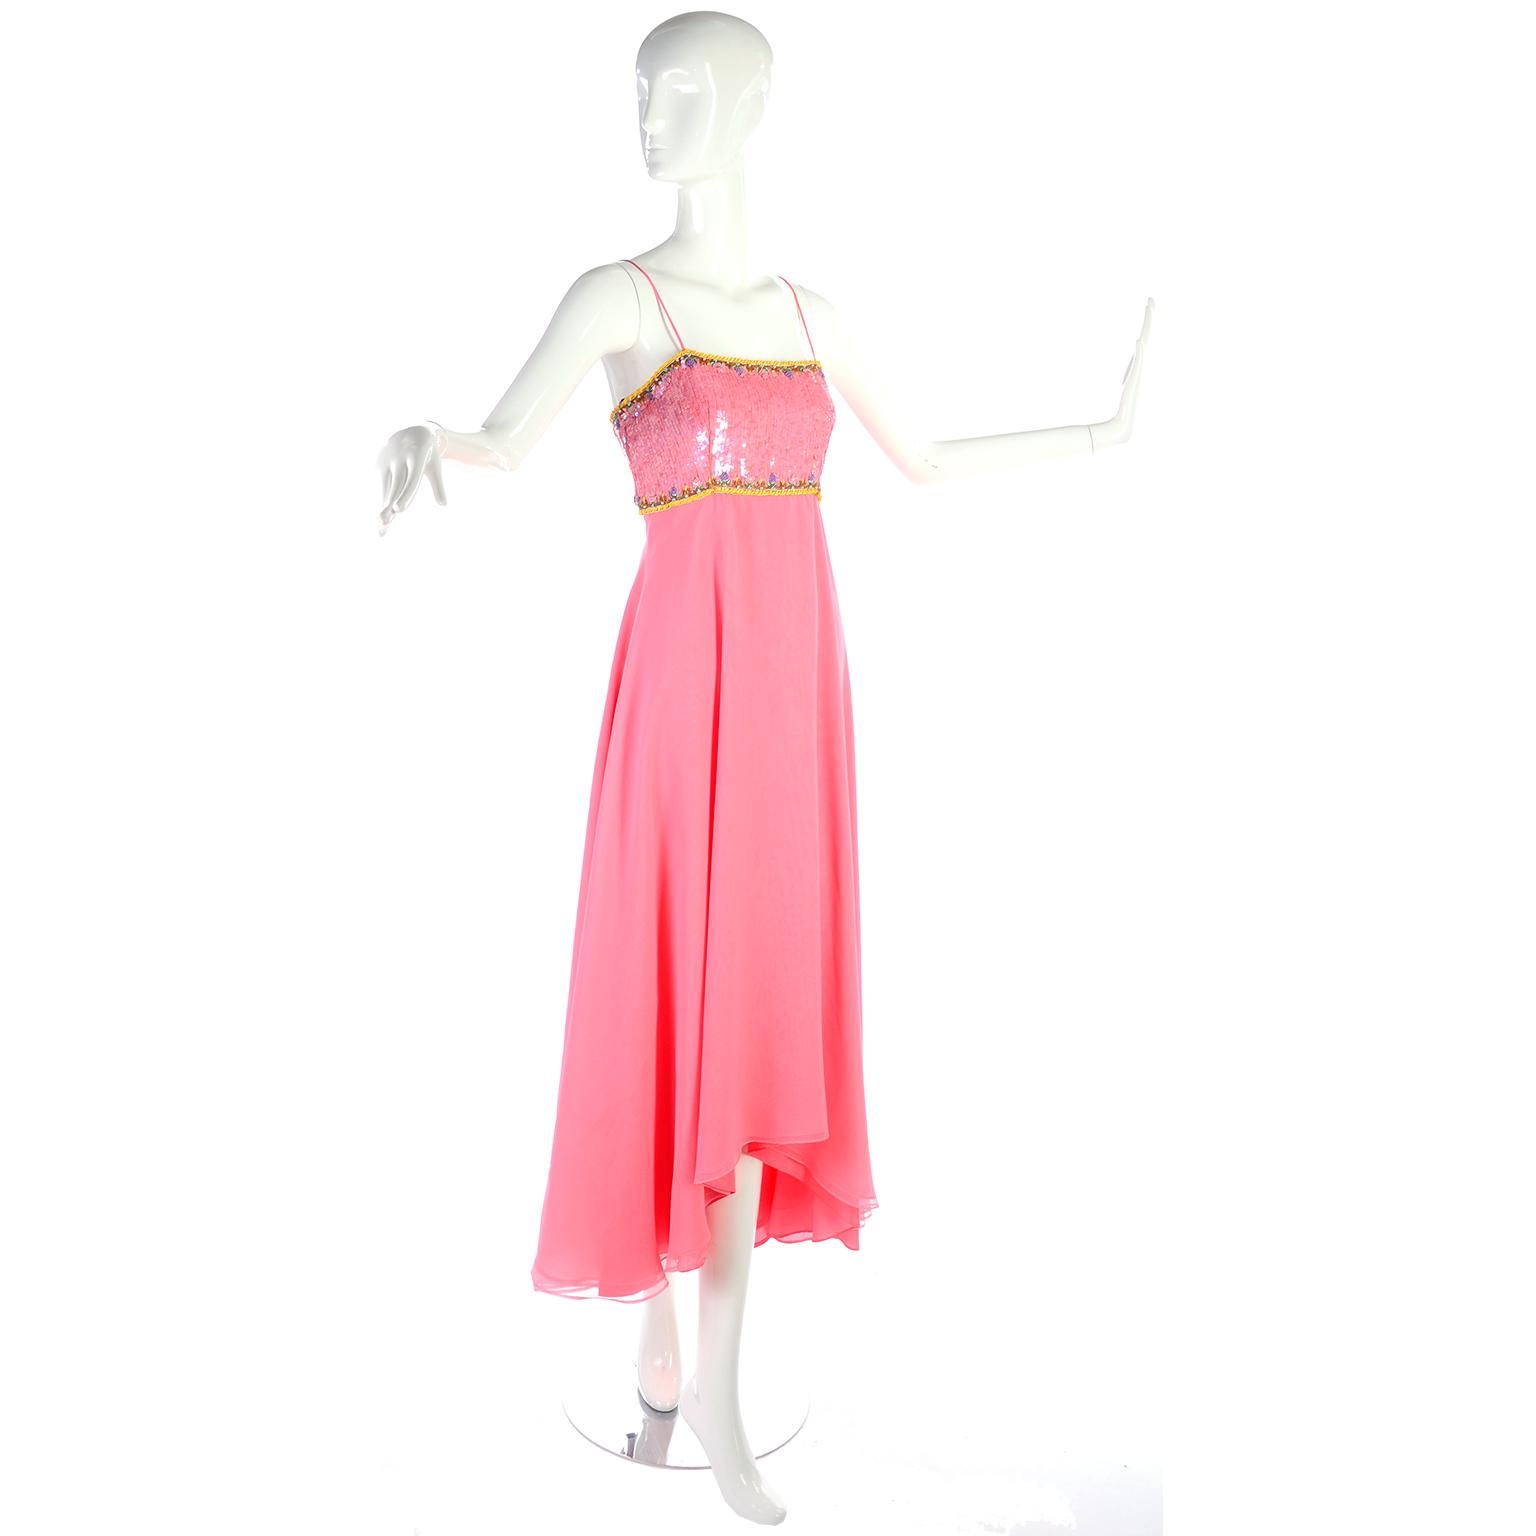 This is a lovely vintage dress from Richilene with long double layers of pink chiffon with an asymmetrical hem that comes with a beautiful jacket with beads and sequins.. The late 1970's or early 1980's evening gown has spaghetti straps and a